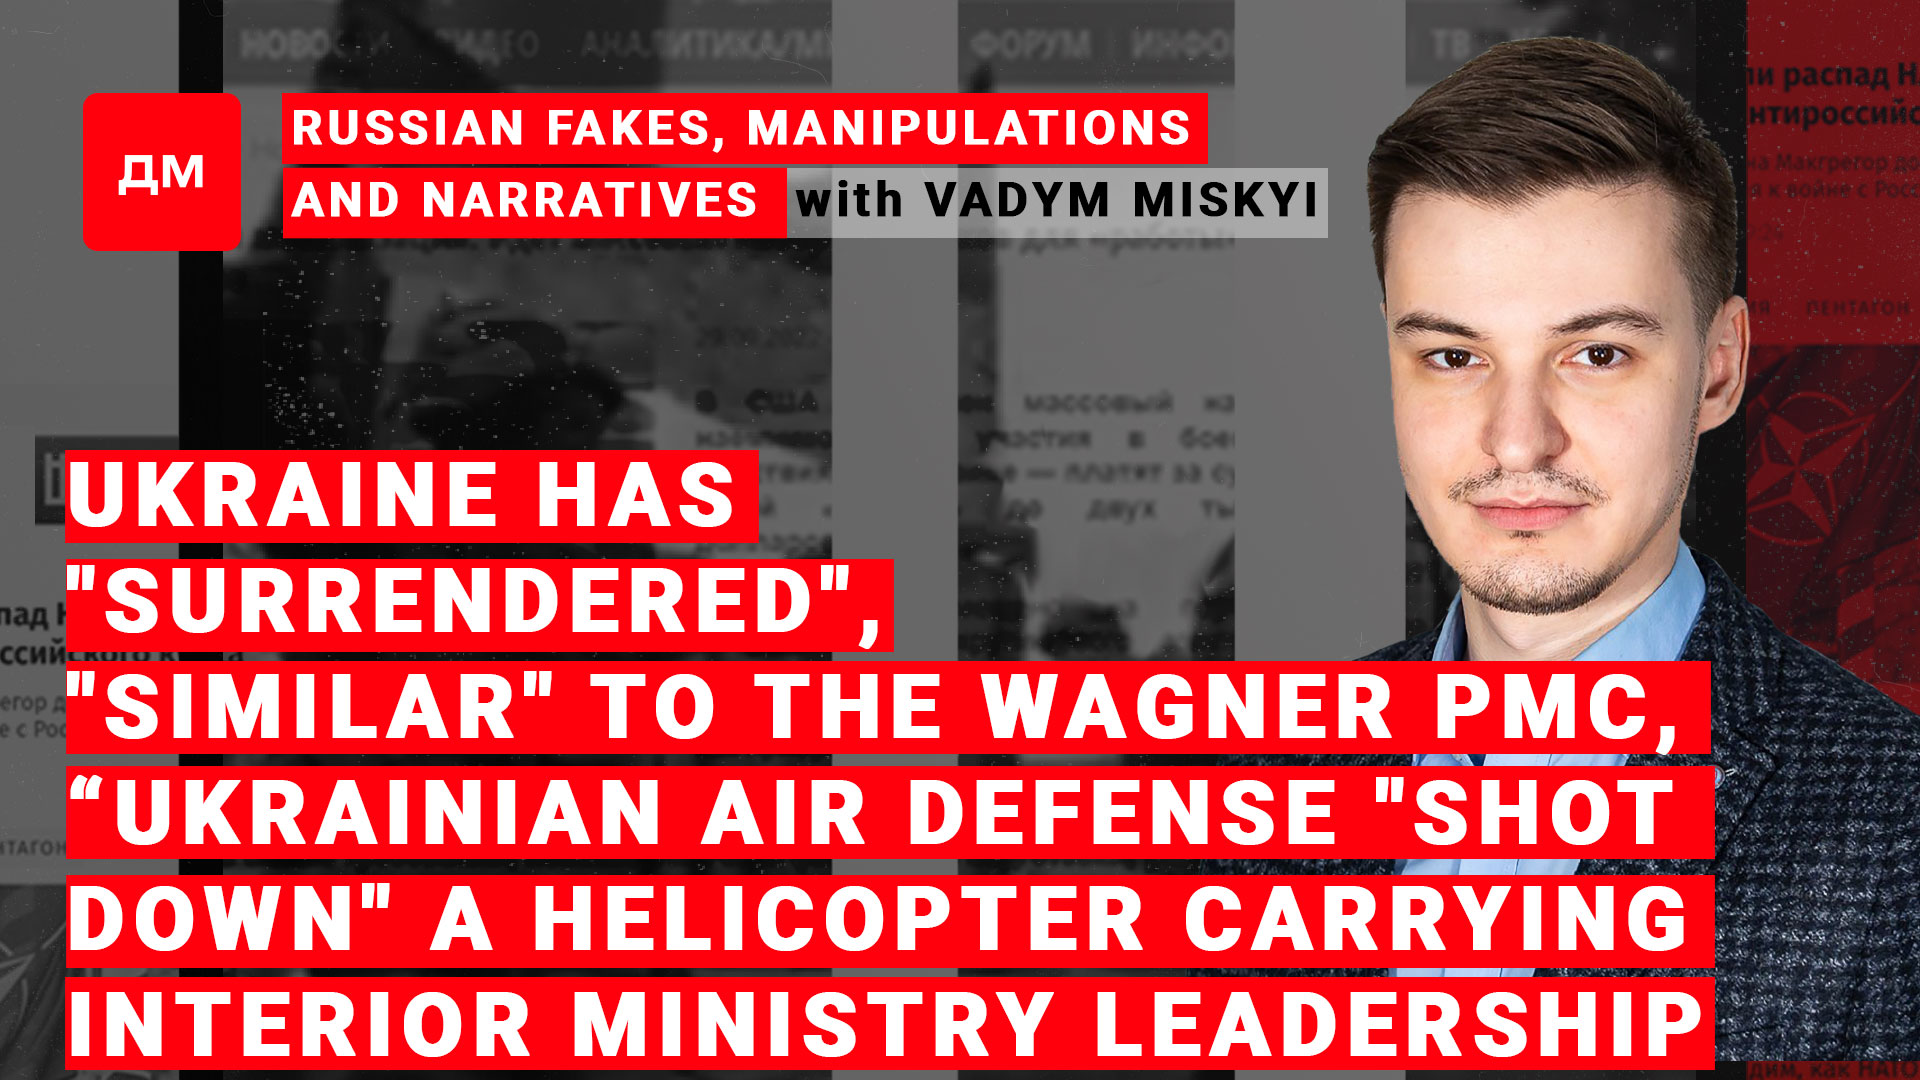 Image: Russian fakes, manipulations and narratives / Briefing by Vadym Miskyi #20